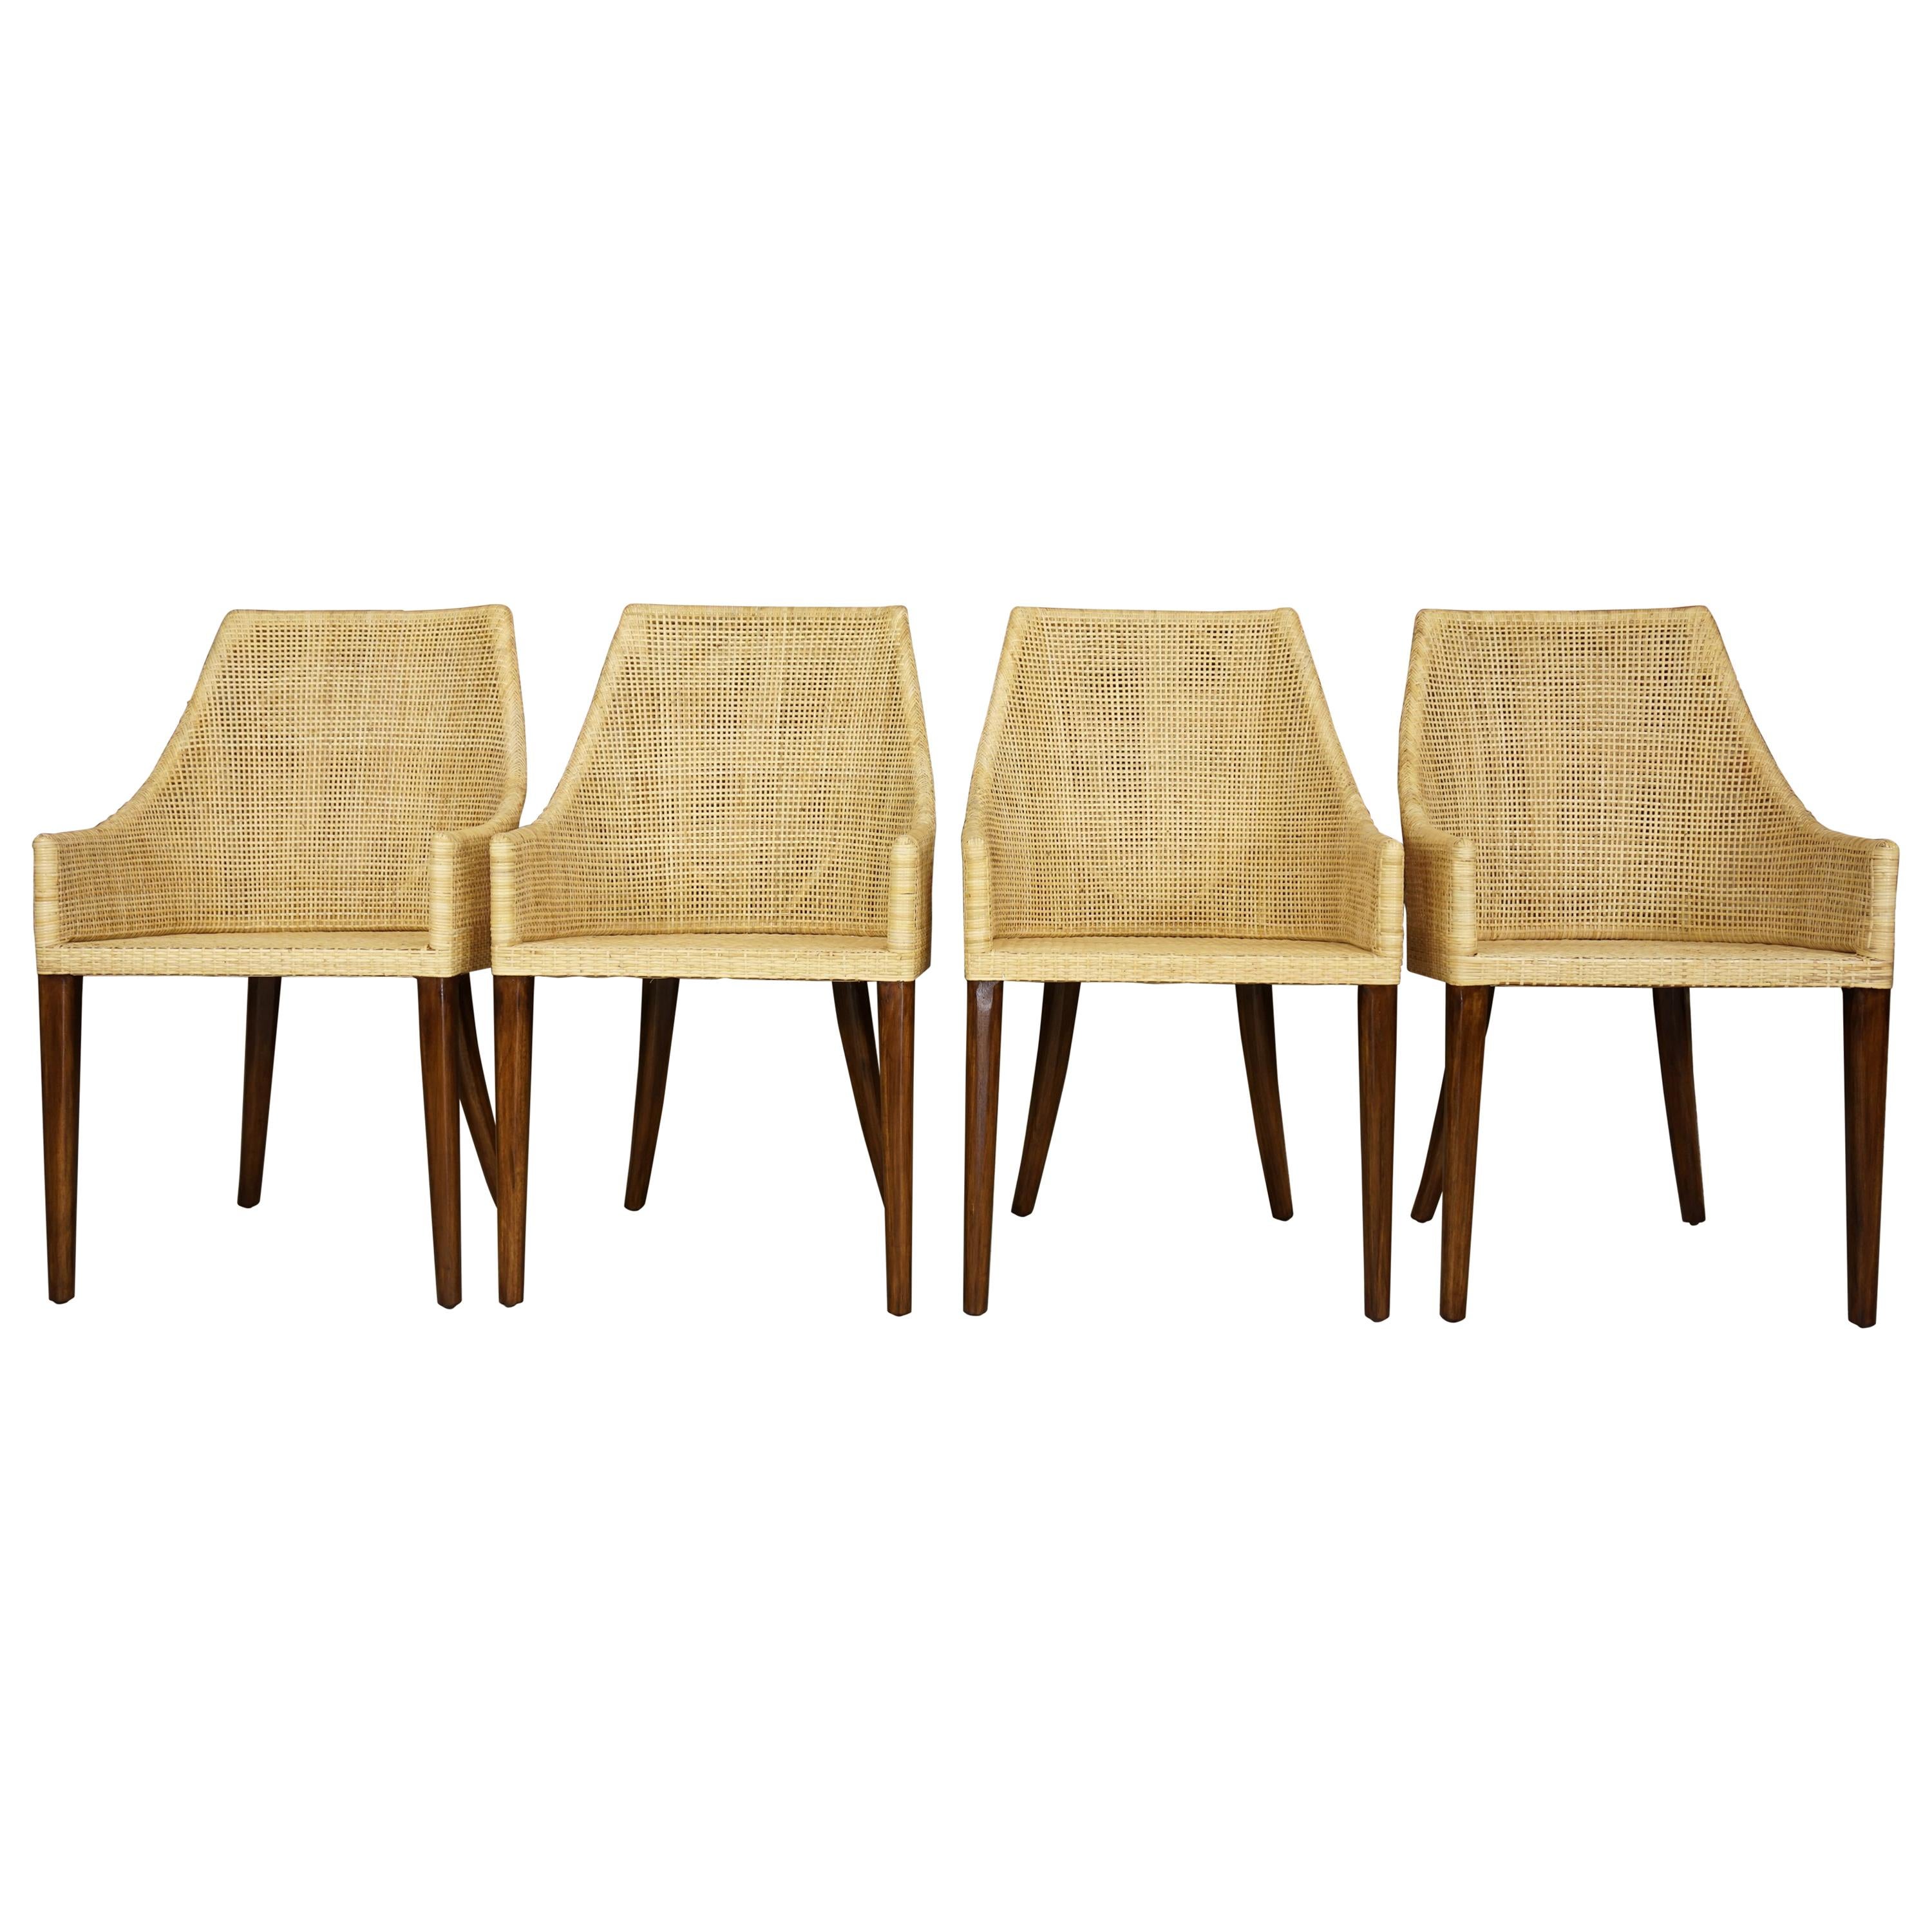 Elegant set of 4 dining armchairs with solid wood feet and braided rattan combining quality, robustness and class. They will be perfect on your terrace, in your veranda, your winter garden, around the dining table and even in your office! In